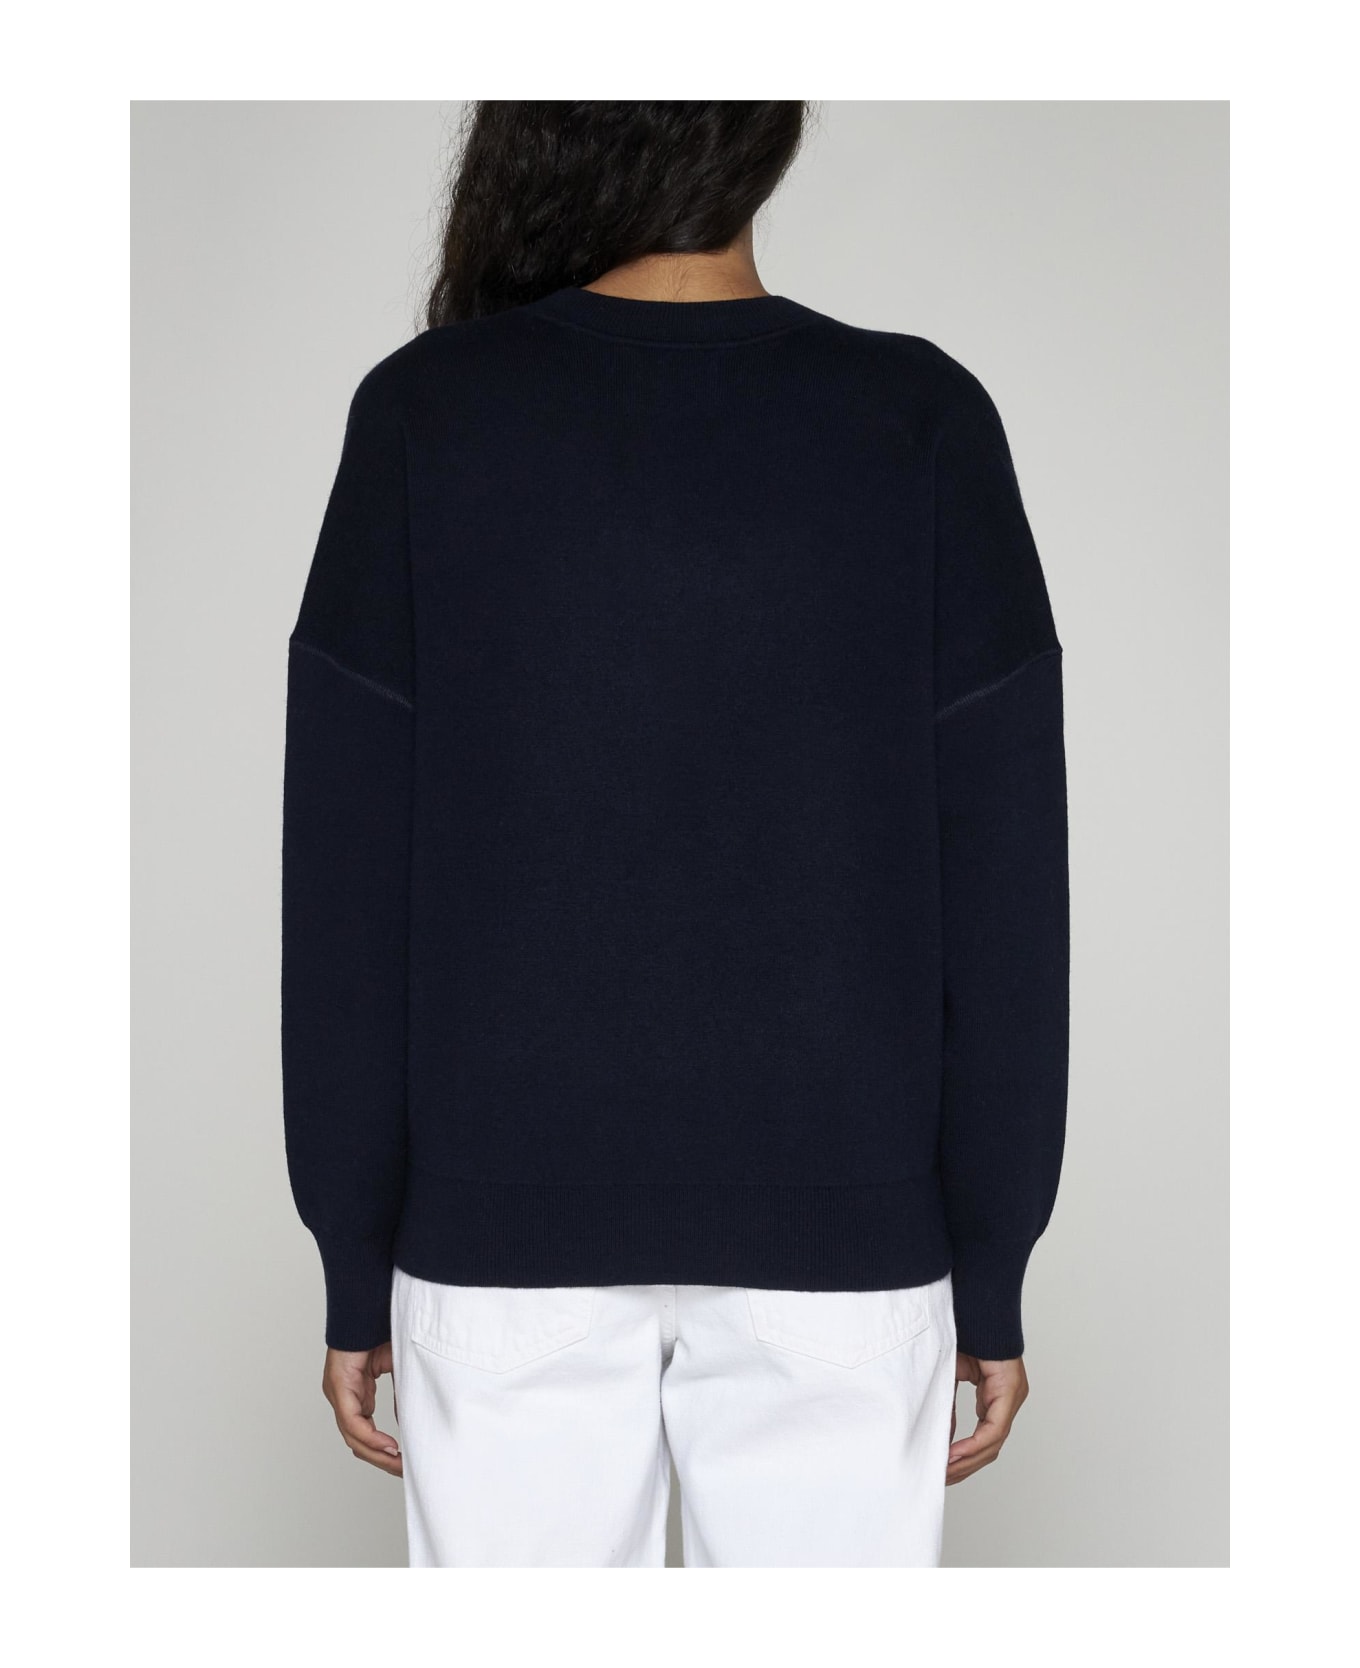 Marant Étoile Atlee Cotton And Wool Blend Sweater - Midnight フリース